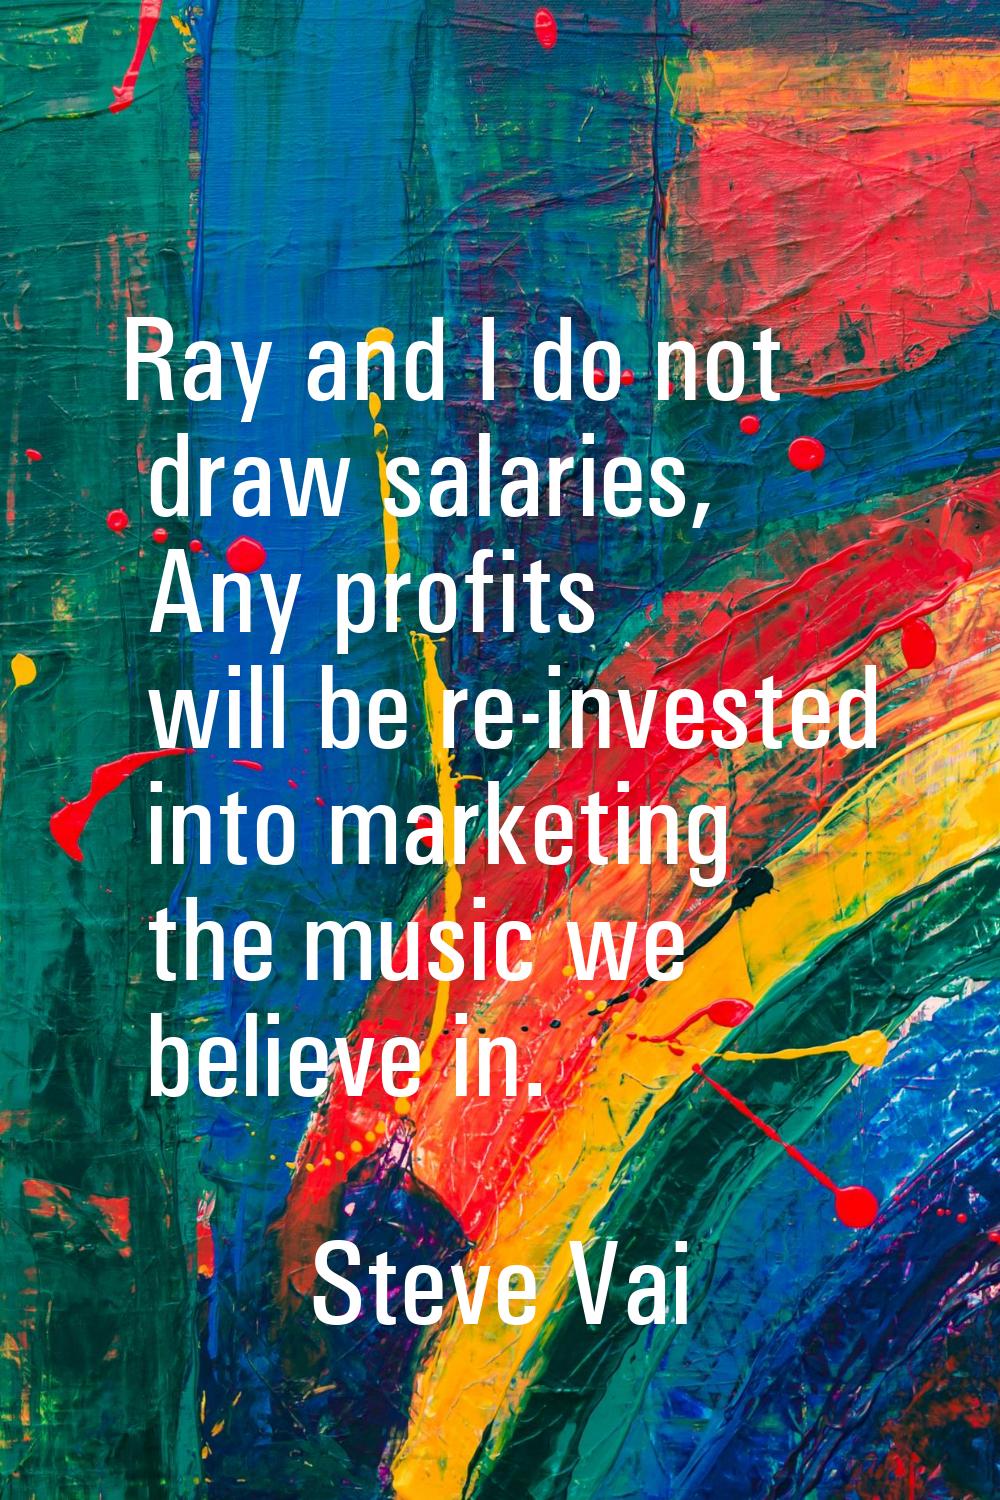 Ray and I do not draw salaries, Any profits will be re-invested into marketing the music we believe